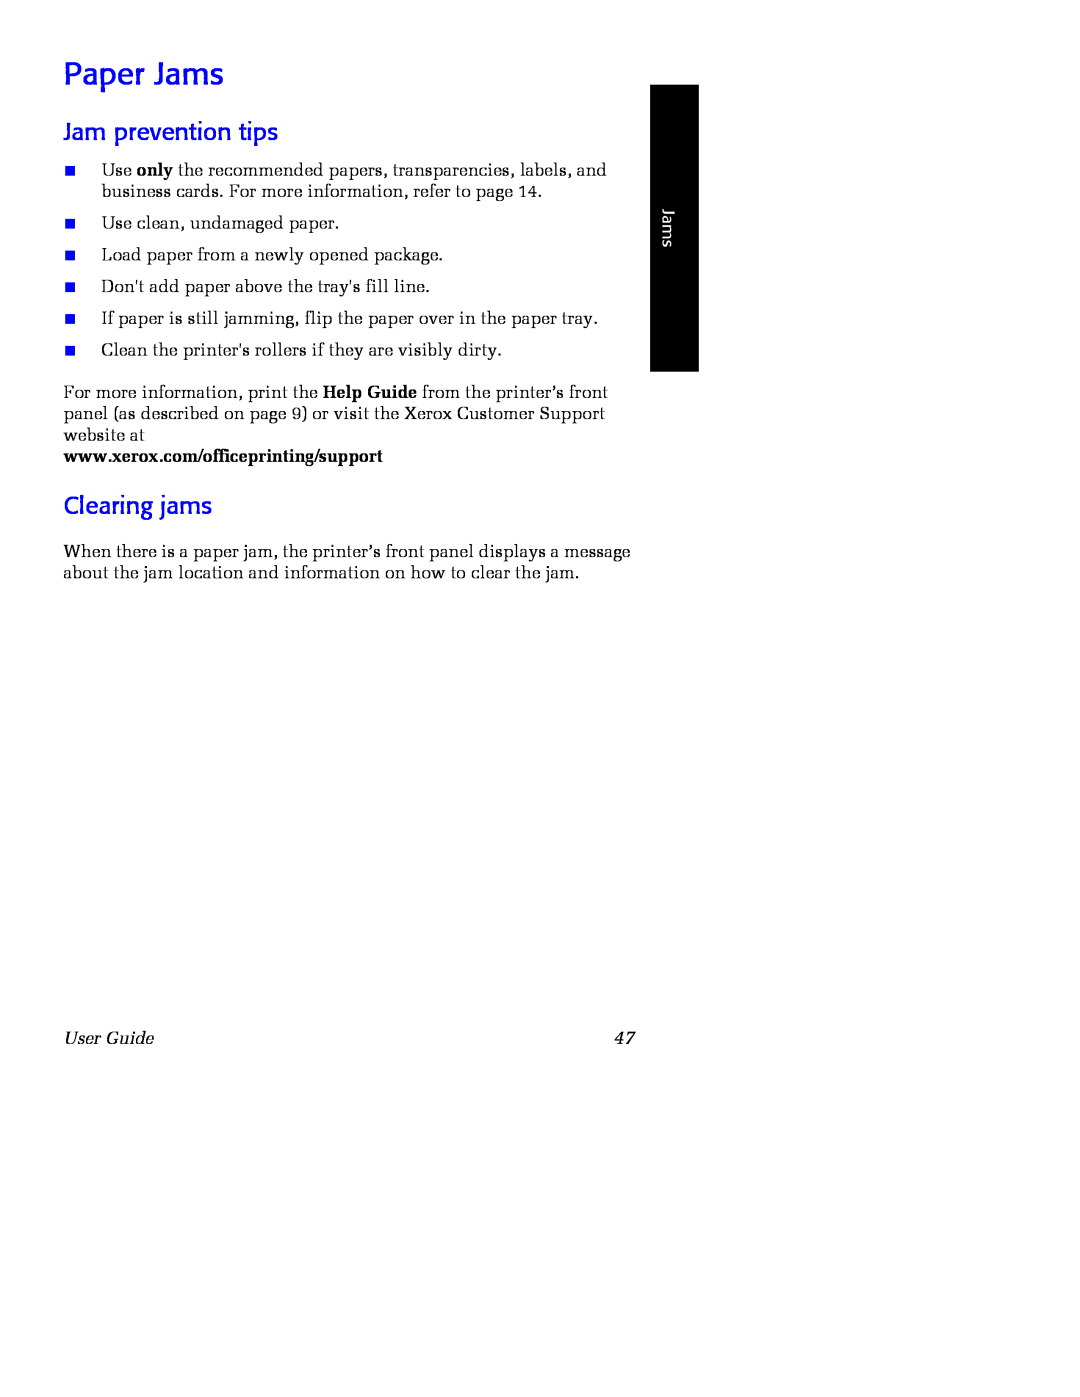 Xerox Phaser 860 manual Paper Jams, Jam prevention tips, Clearing jams, User Guide 